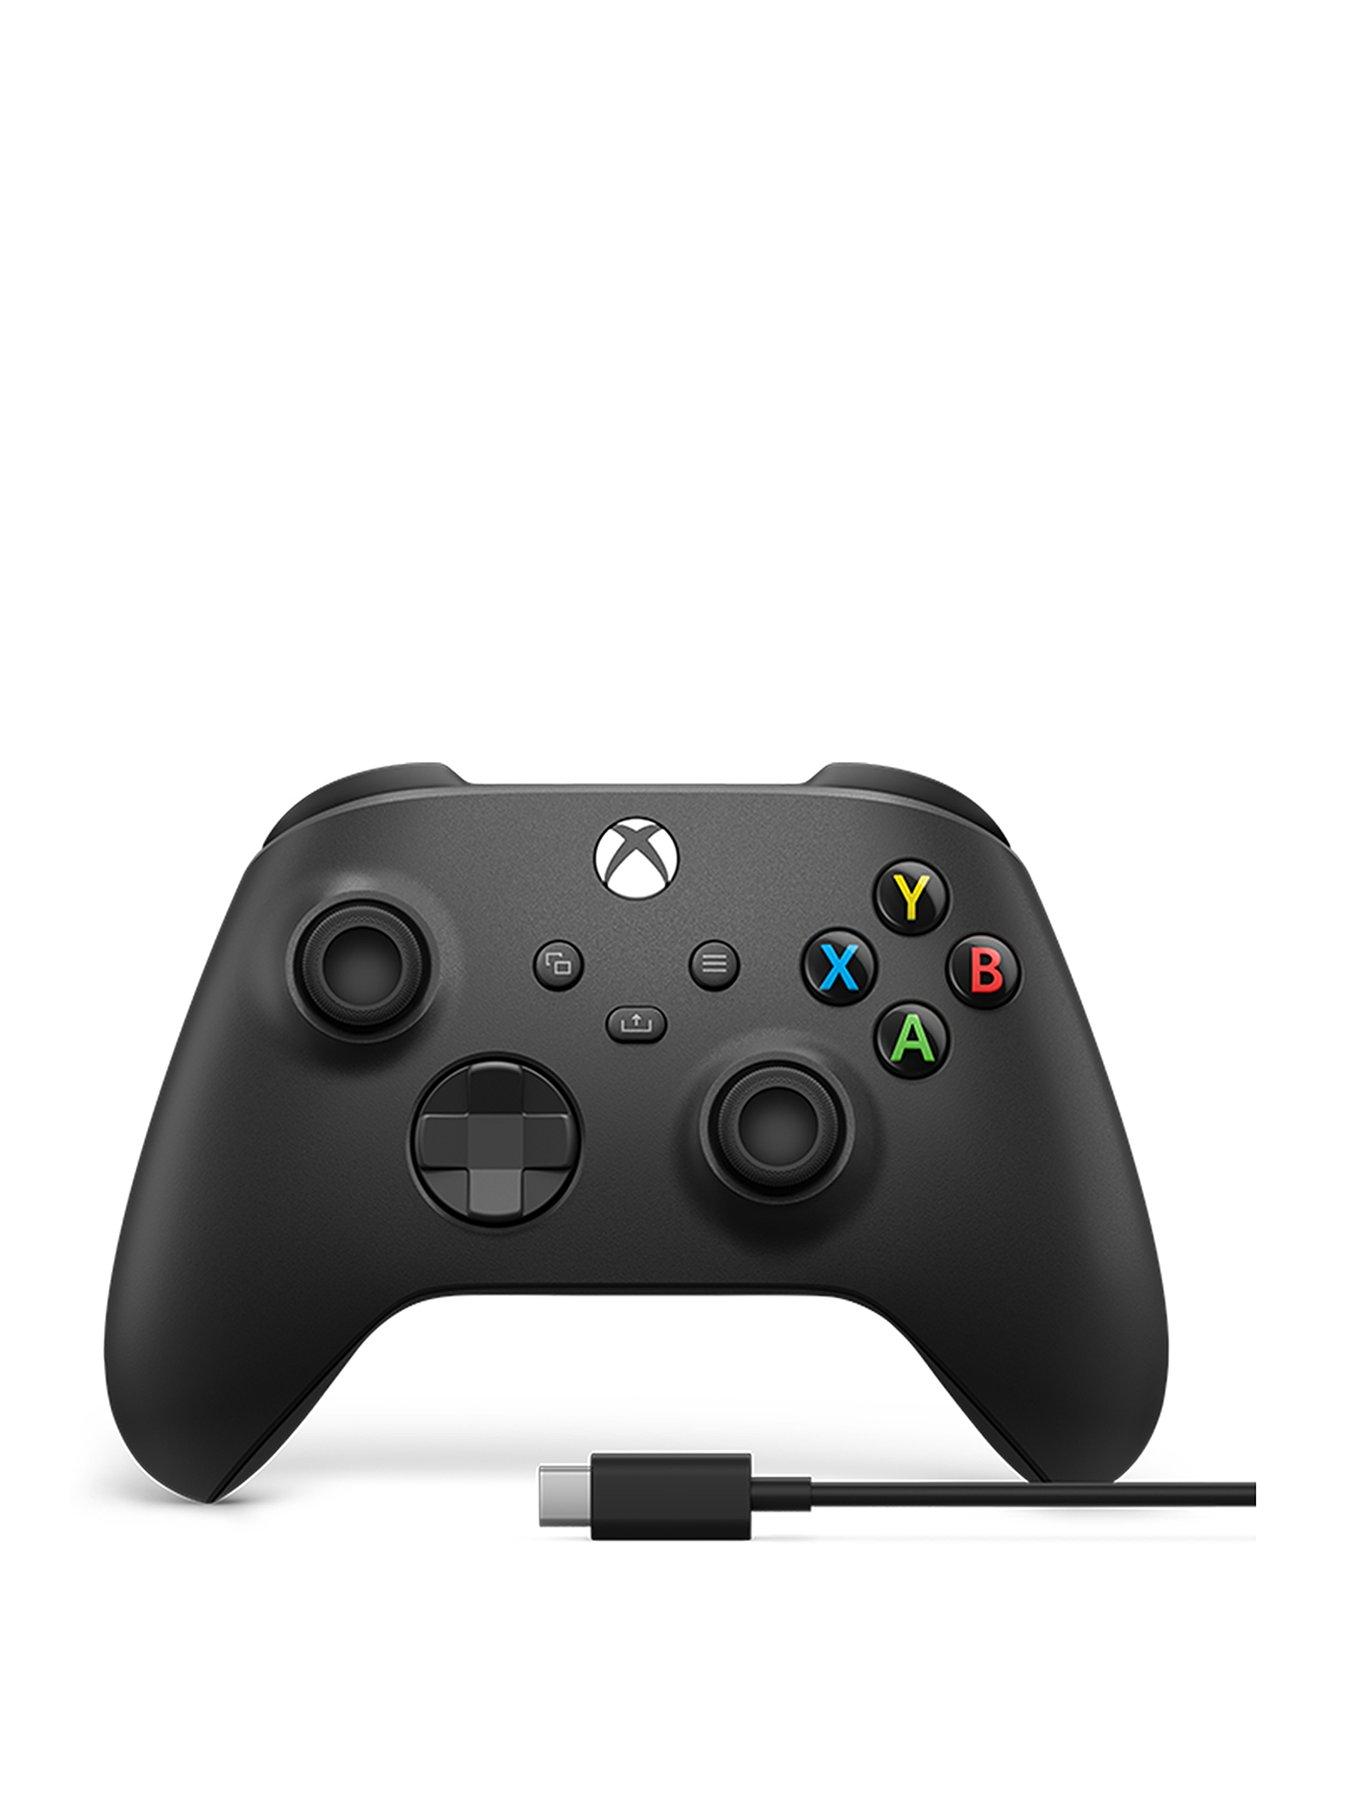 xbox one wireless controller with paddles - Online Discount Shop for  Electronics, Apparel, Toys, Books, Games, Computers, Shoes, Jewelry,  Watches, Baby Products, Sports & Outdoors, Office Products, Bed & Bath,  Furniture, Tools